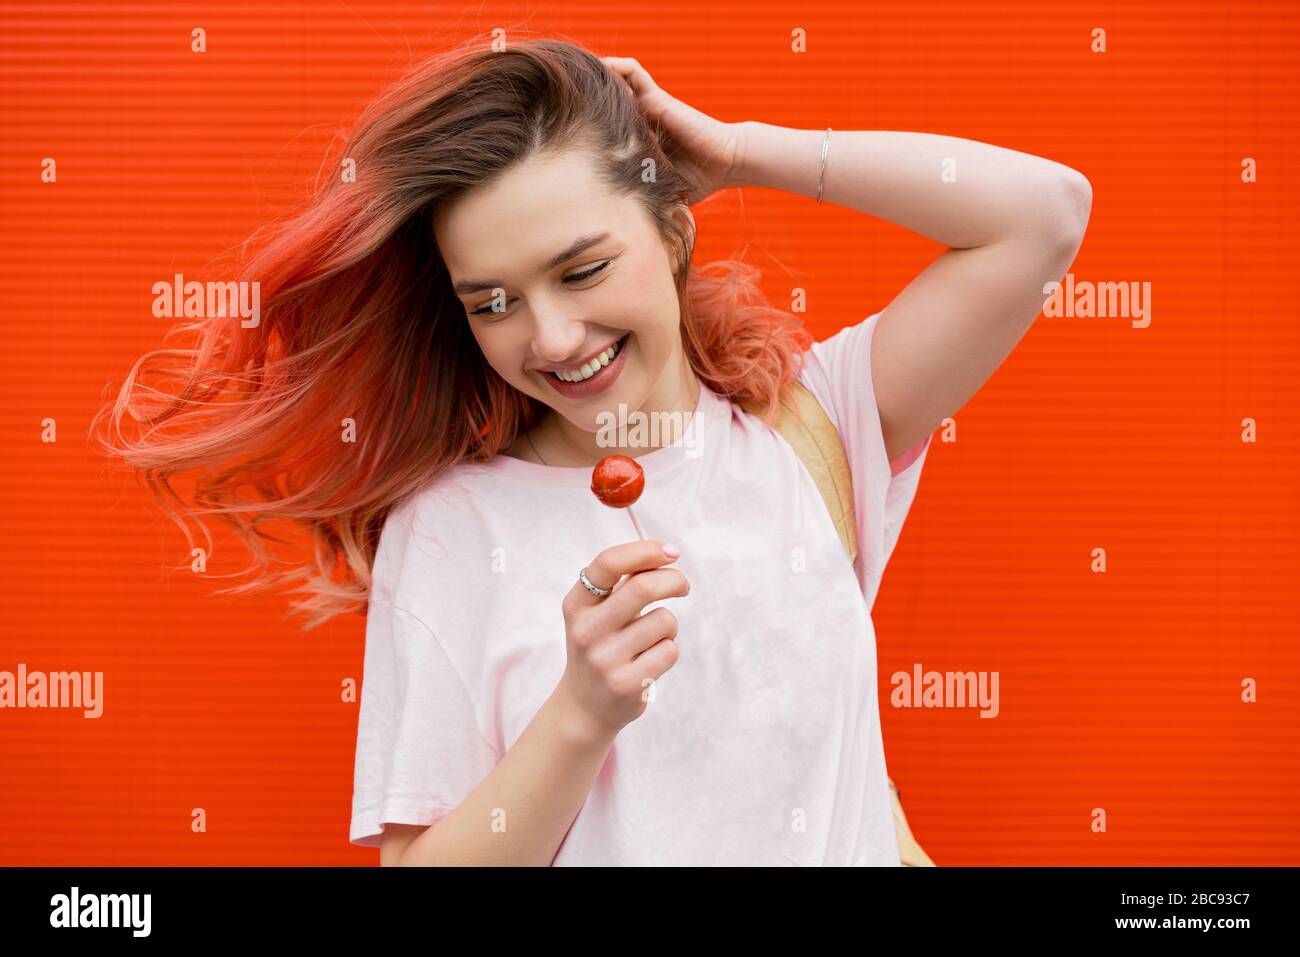 Fashion portrait of pretty smiling hipster woman with red flying haies and lollipop against the colorful orange wall Stock Photo